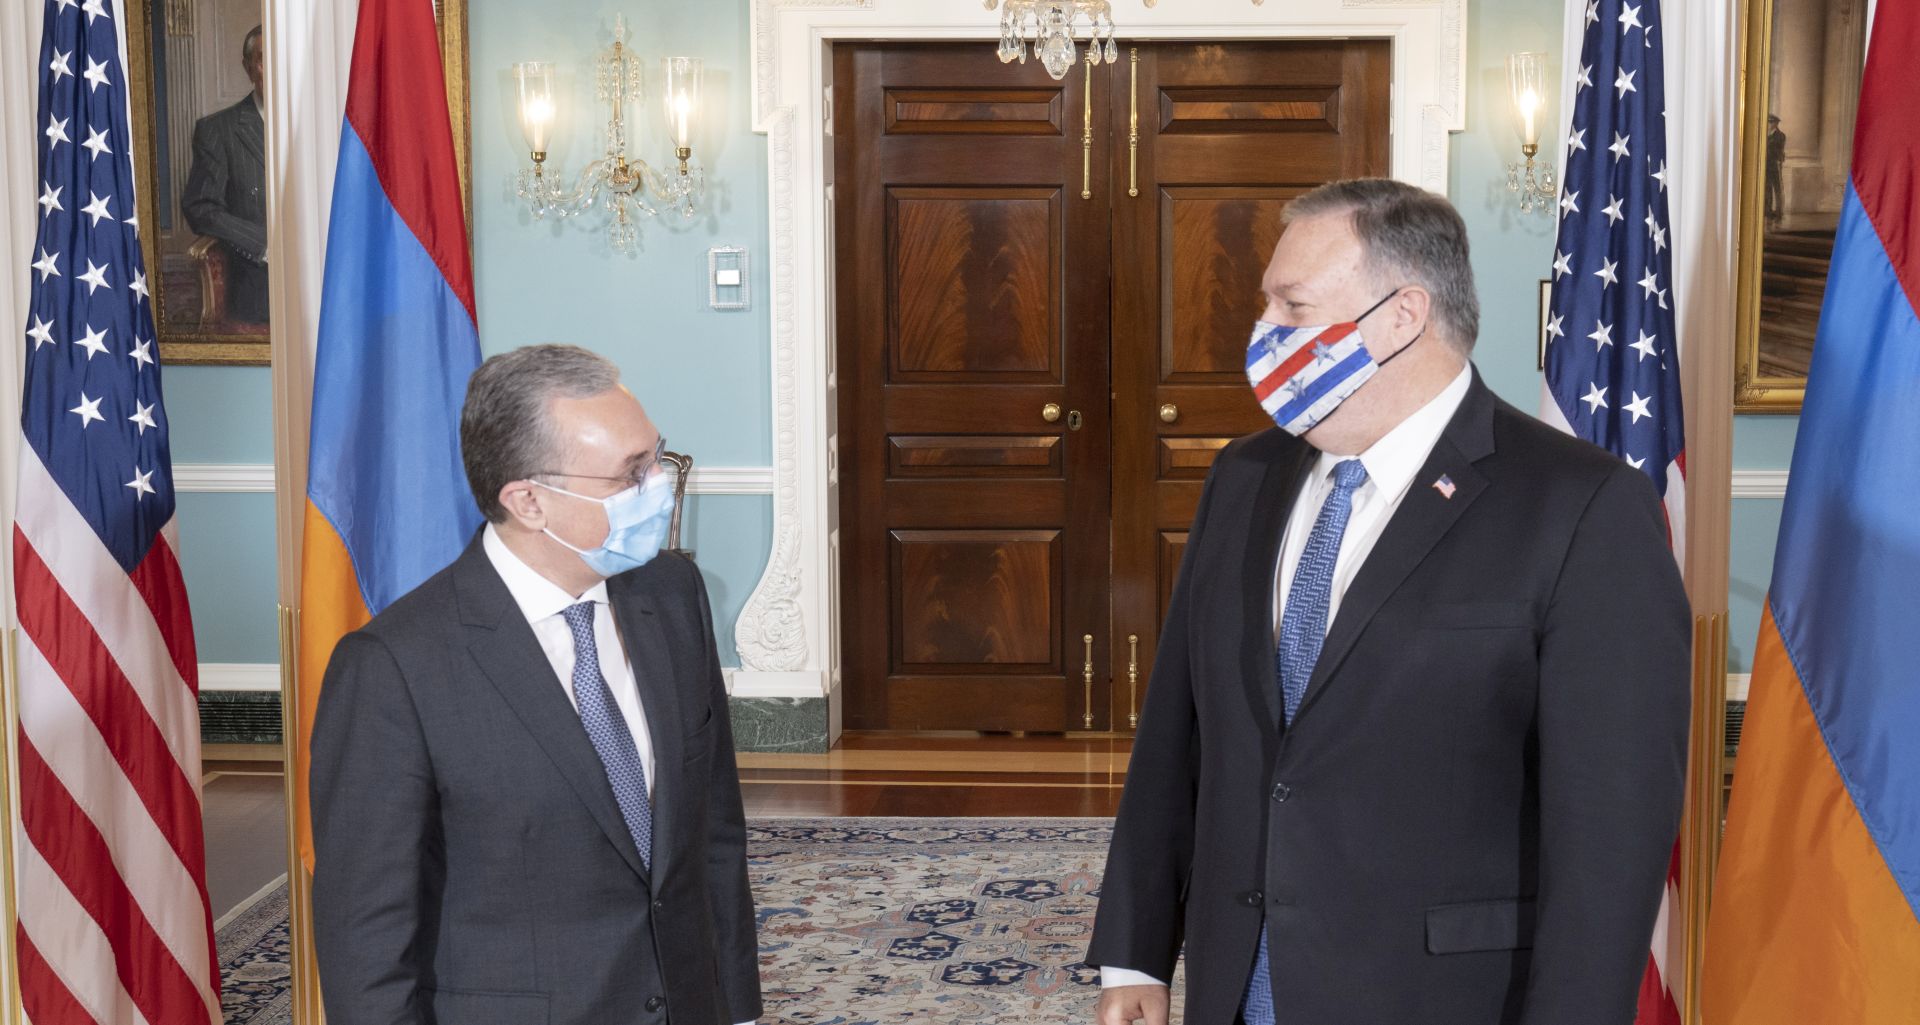 epa08768332 A handout photo made available by the US Department of State shows US Secretary of State Michael R. Pompeo (R) meeting with Armenian Foreign Minister Zohrab Mnatsakanyan at the State Department in Washington, DC, USA, 23 October 2020. Azerbaijan and Armenia are currently engaged in an armed territorial conflict over the Nagorno-Karabakh territory along the contact line of the self-proclaimed Nagorno-Karabakh Republic (also known as Artsakh).  EPA/Freddie Everett / US DEPARTMENT OF STATE HANDOUT  HANDOUT EDITORIAL USE ONLY/NO SALES